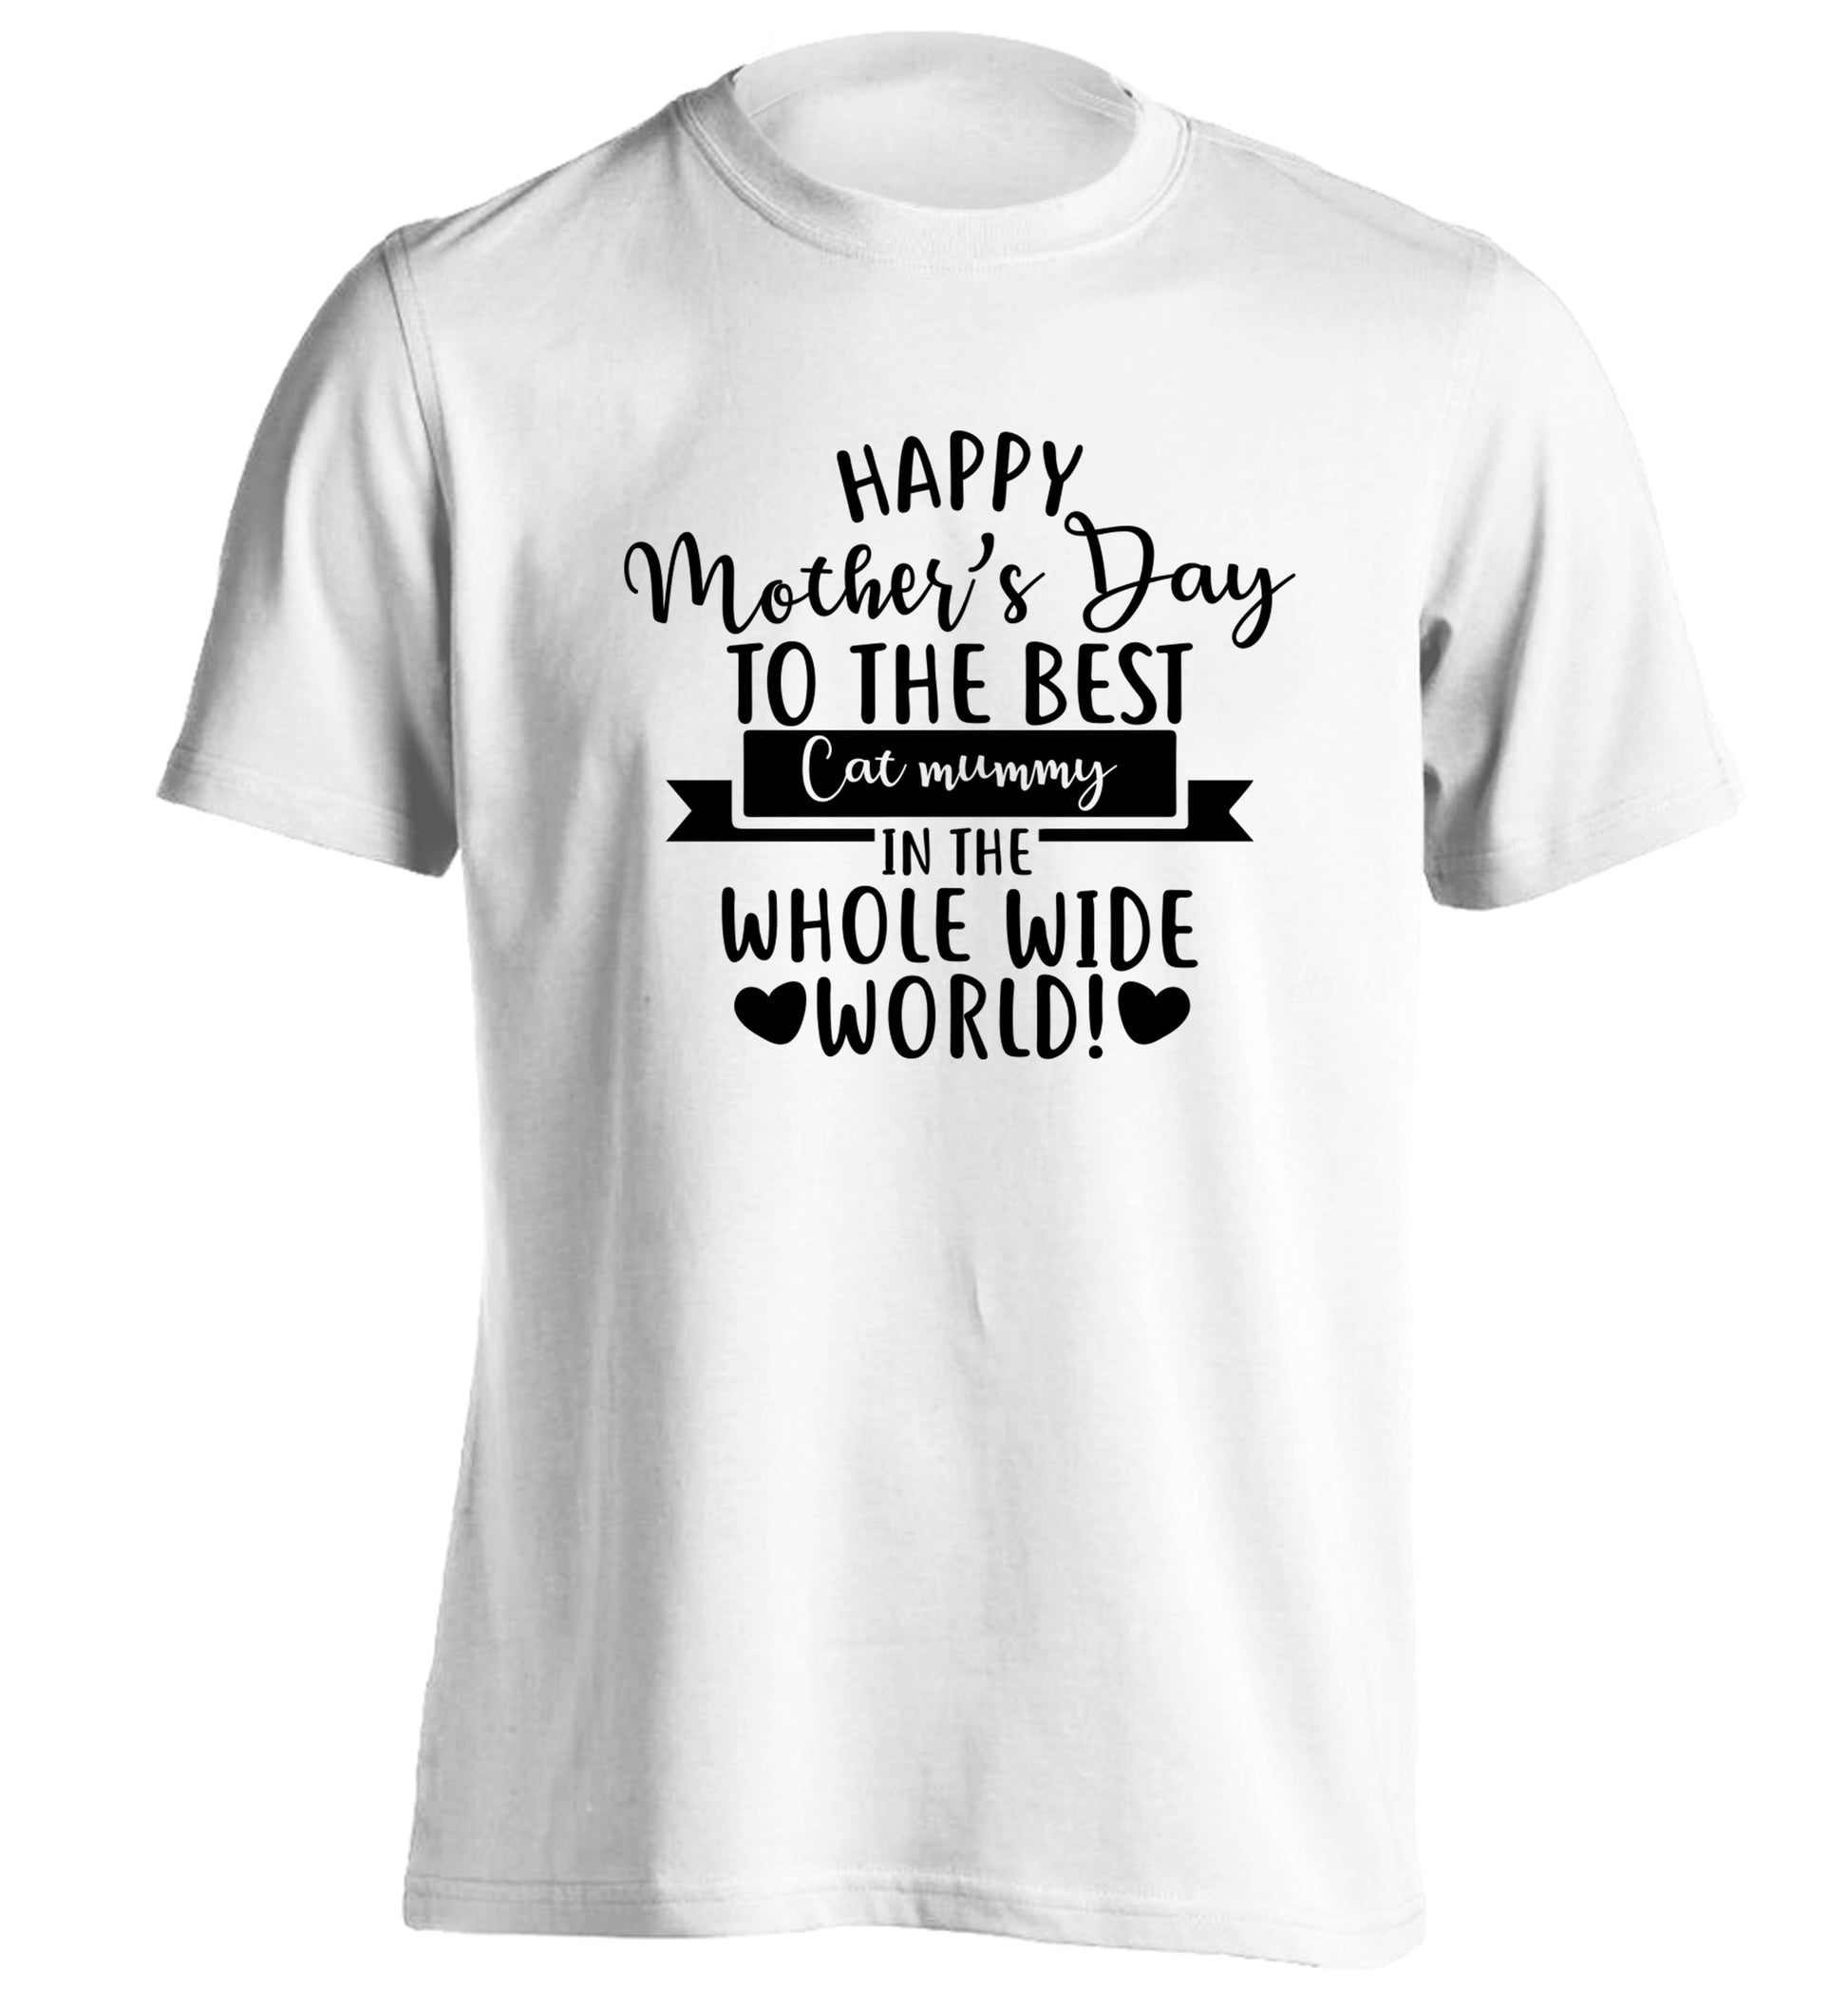 Happy mother's day to the best cat mummy in the world adults unisex white Tshirt 2XL